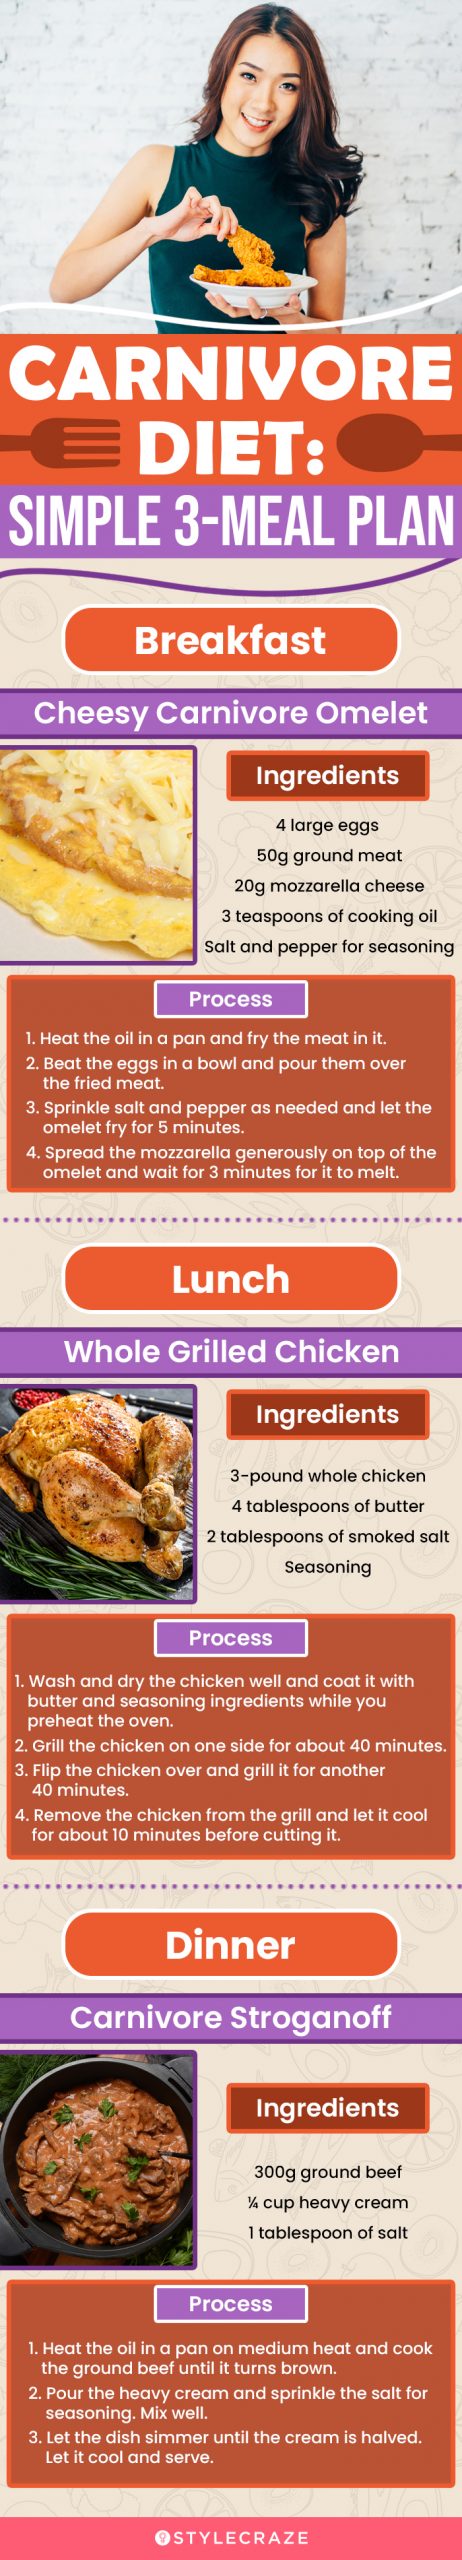 carnivore diet simple 3-meal plan (infographic)